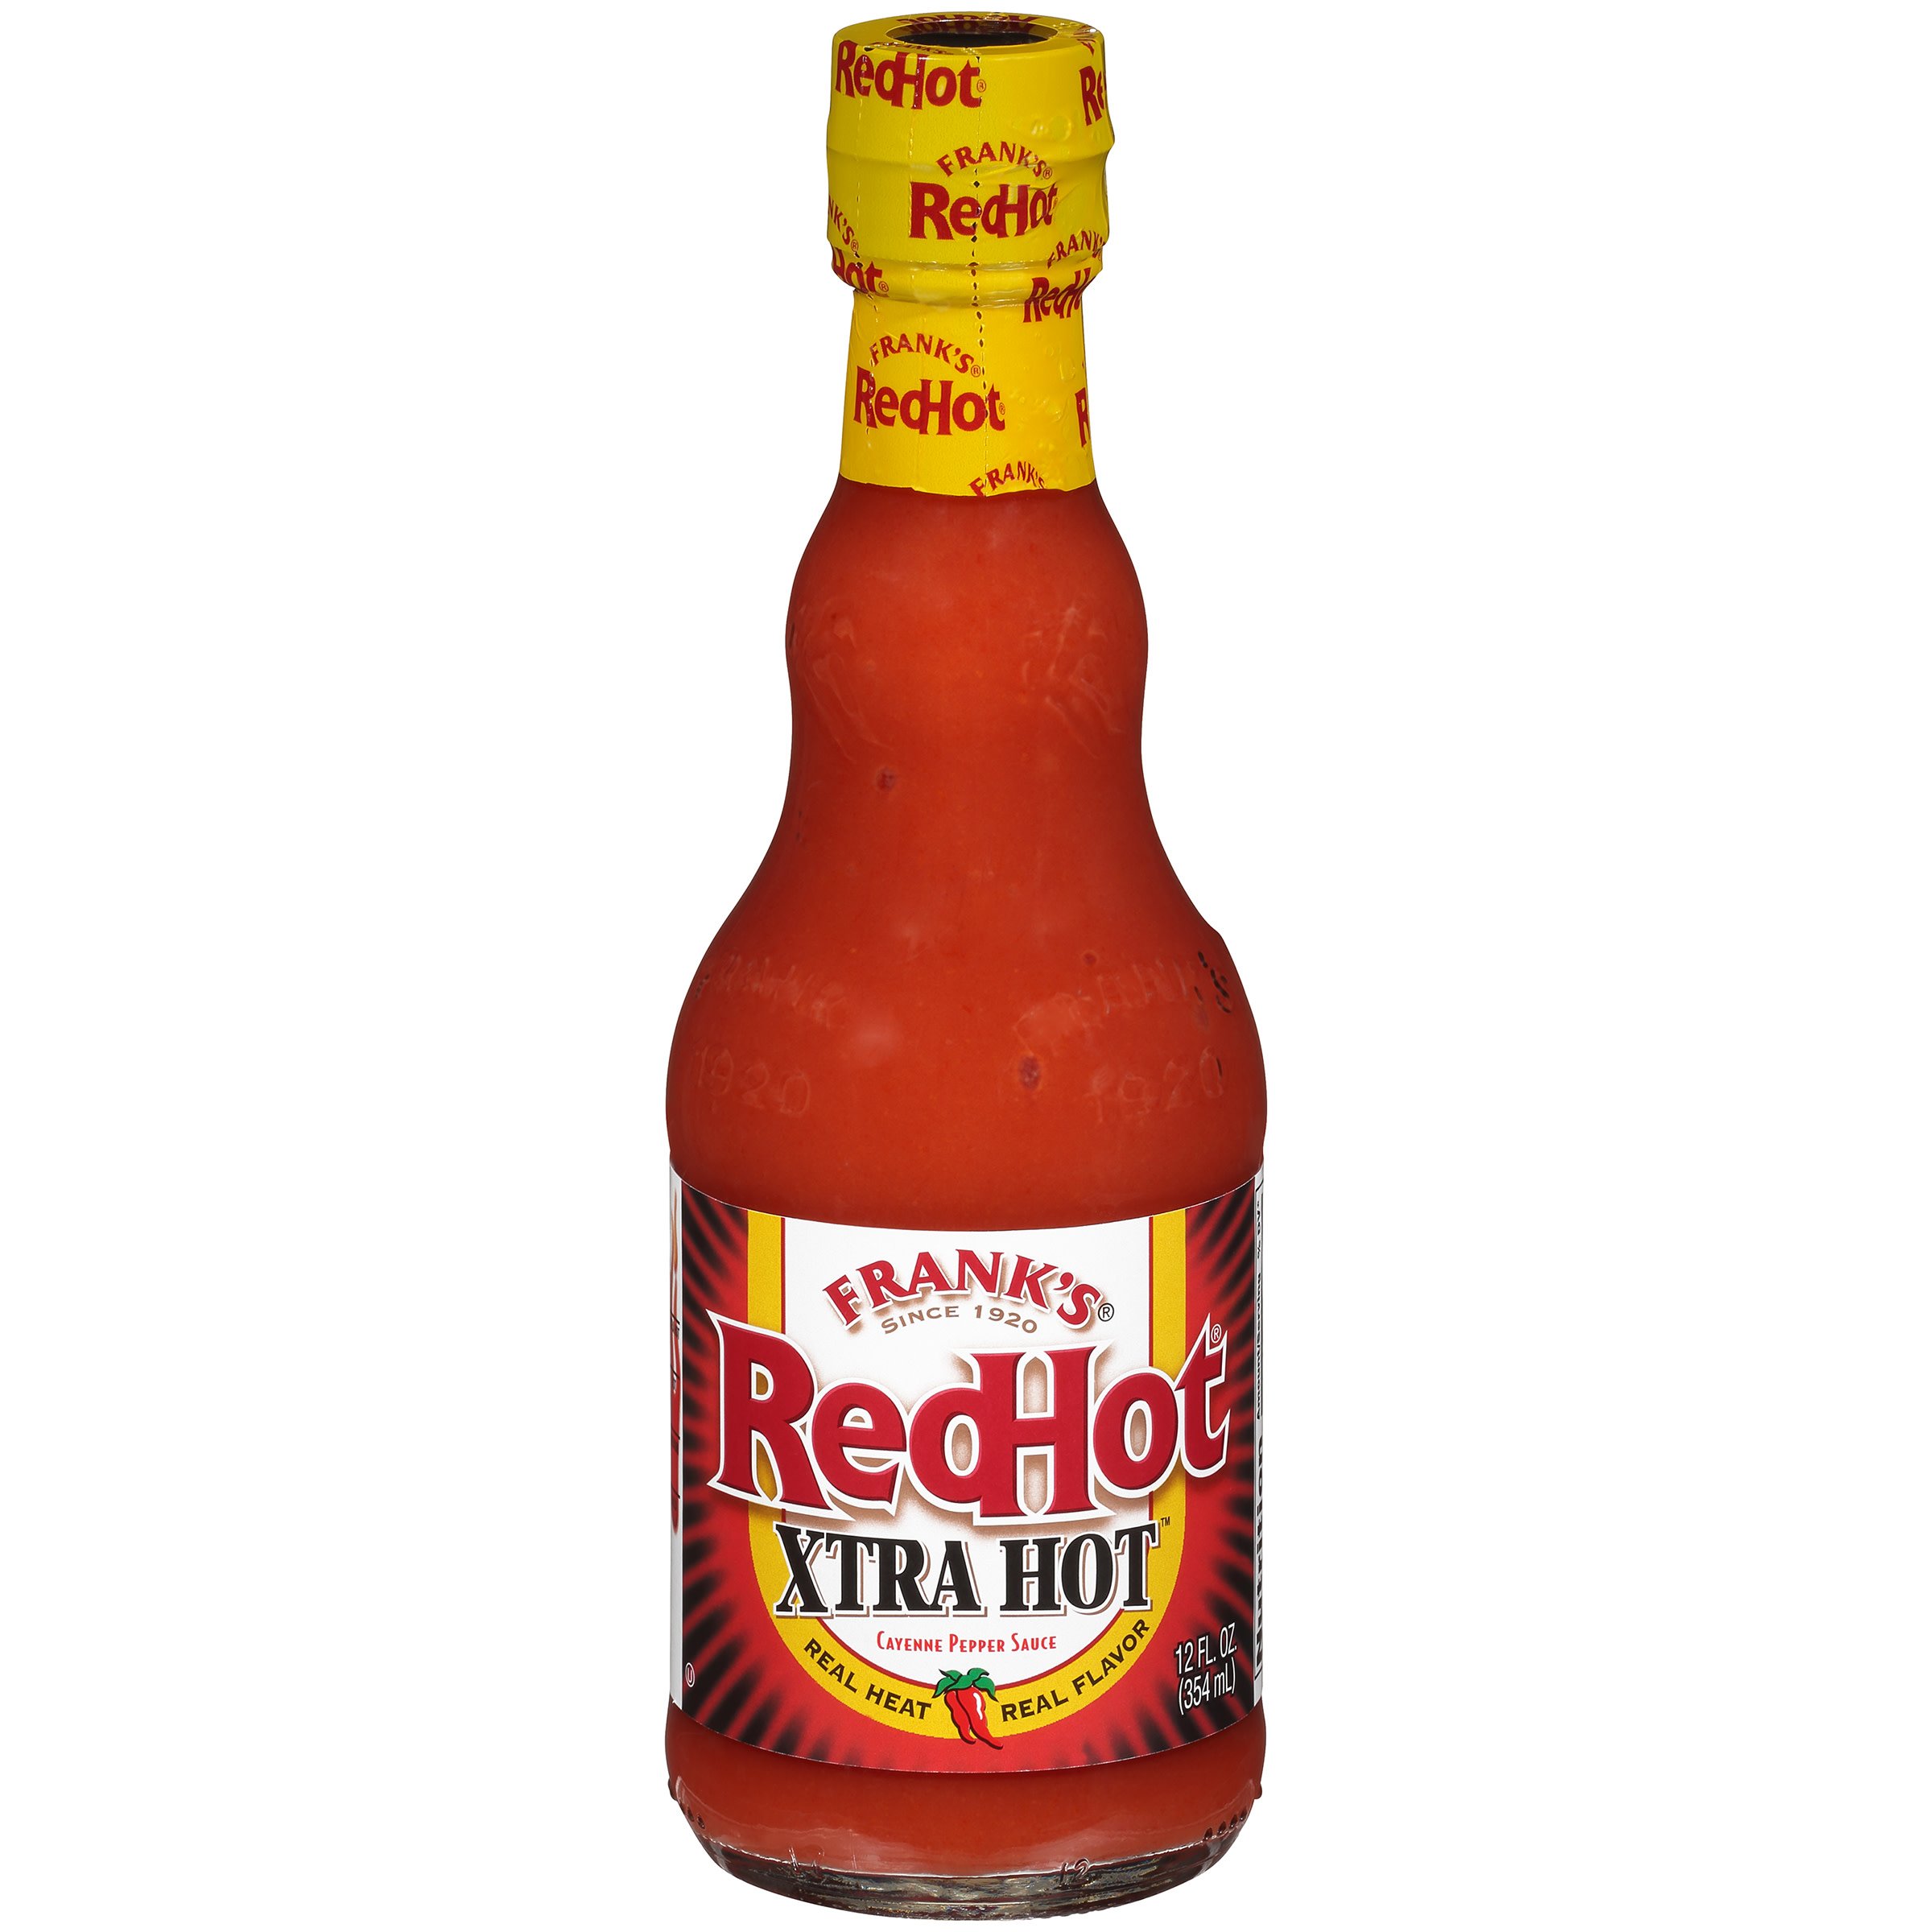 Trappey's Red Devil Cayenne Pepper Sauce